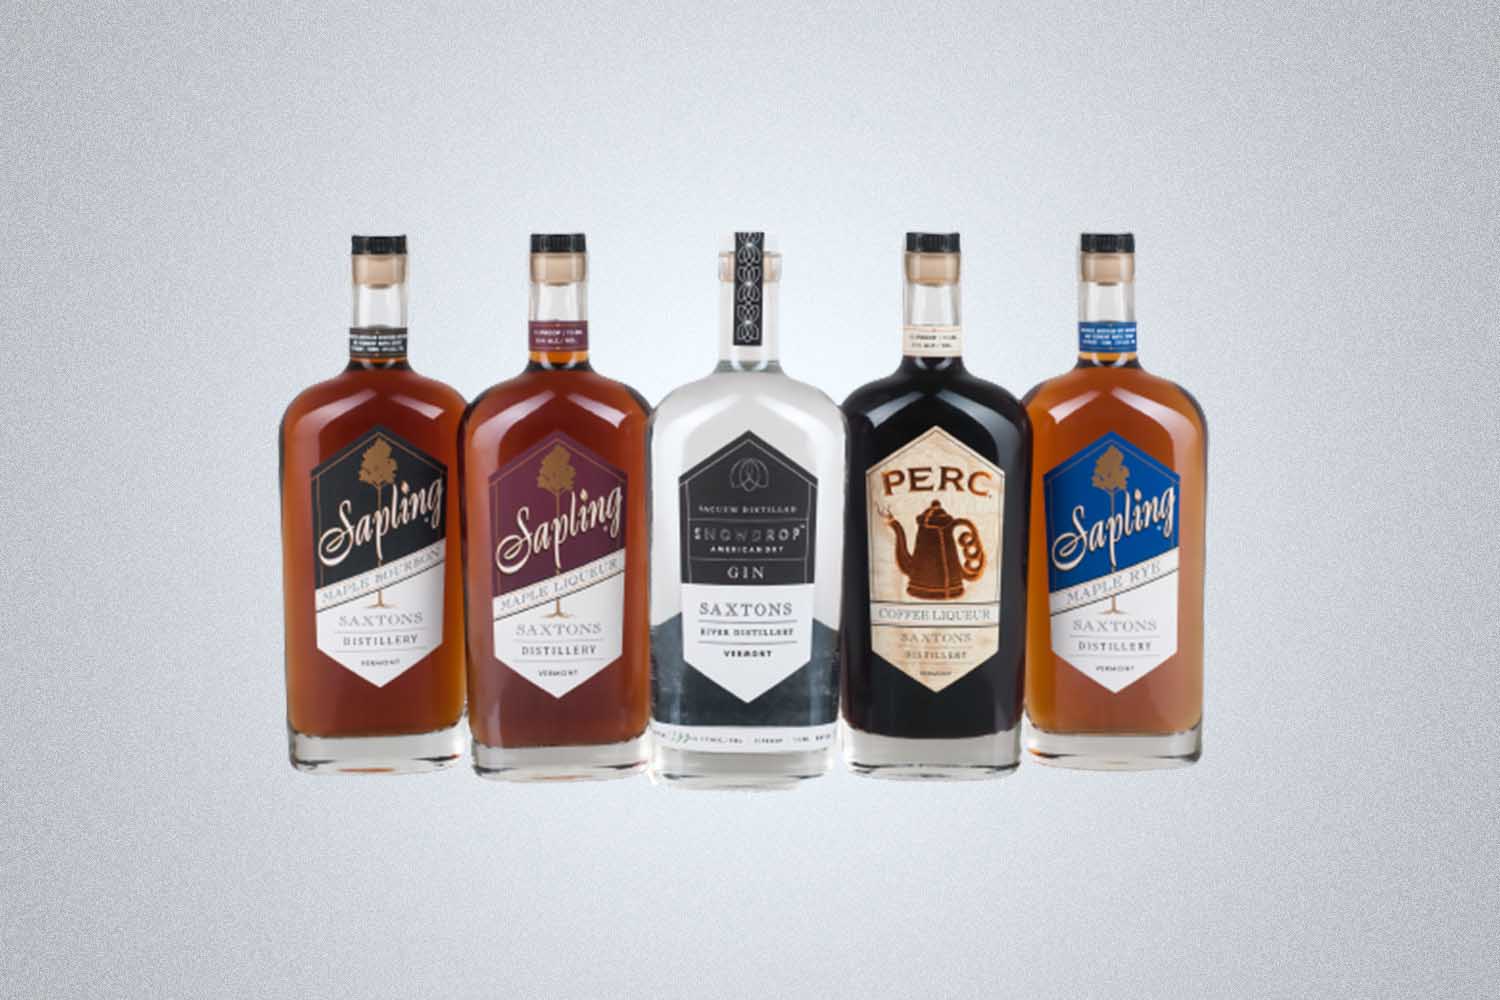 The lineup from Saxtons River Distillery